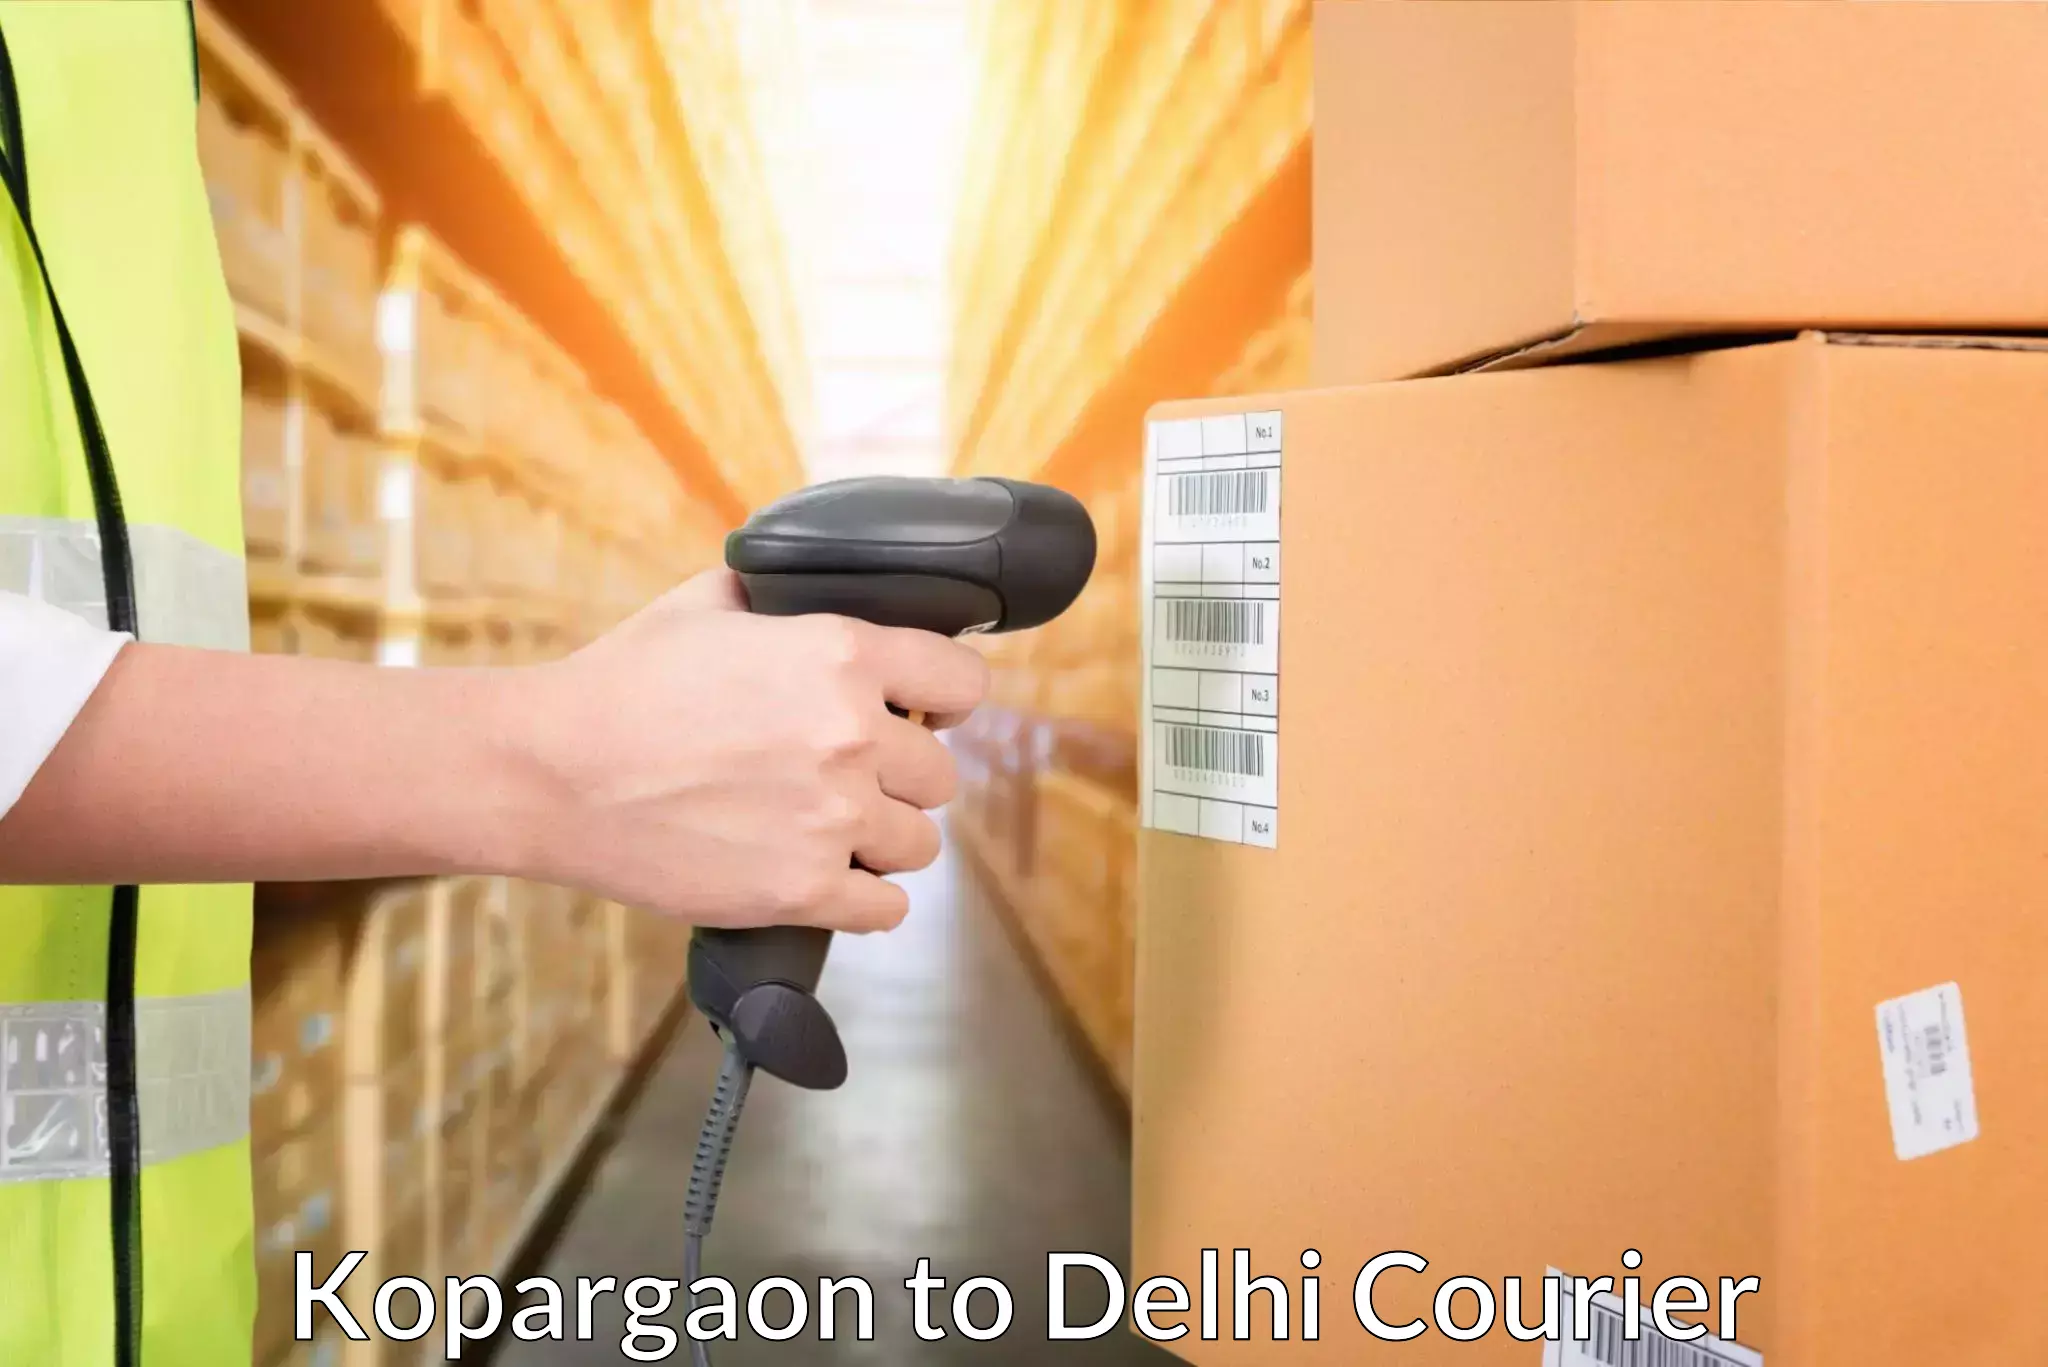 24/7 courier service Kopargaon to NCR